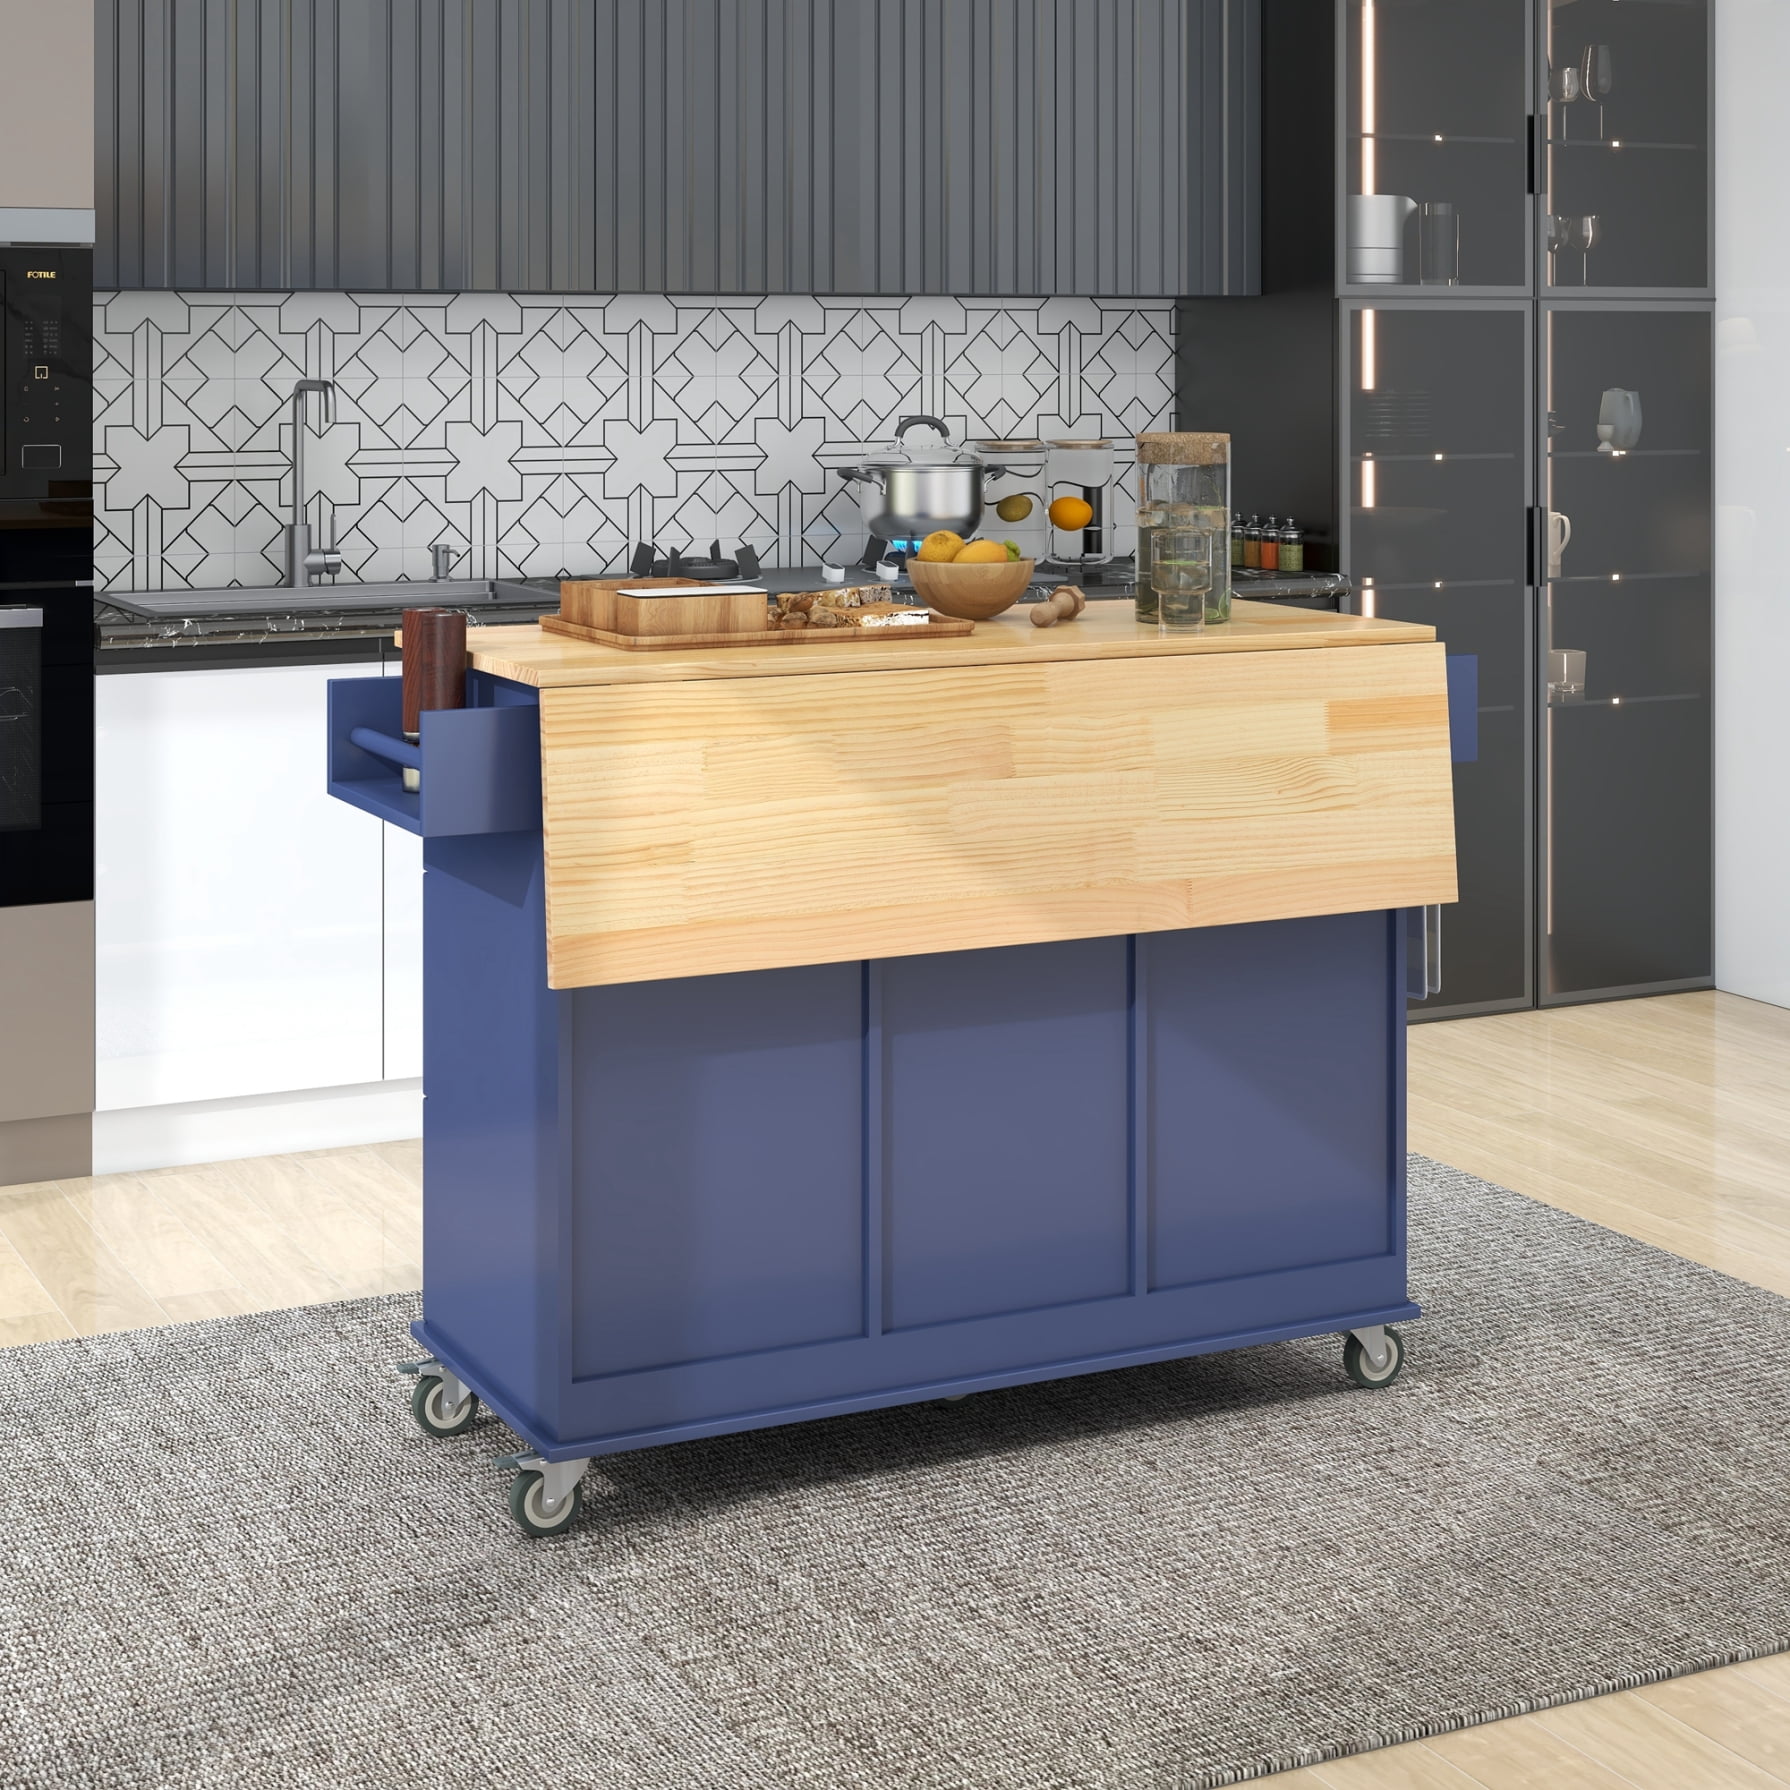 Dropship Kitchen Island Cart With Storage Cabinet And Two Locking  Wheels,Solid Wood Desktop,Microwave Cabinet,Floor Standing Buffet Server  Sideboard For Kitchen Room,Dining Room,, Bathroom(Dark Blue) to Sell Online  at a Lower Price